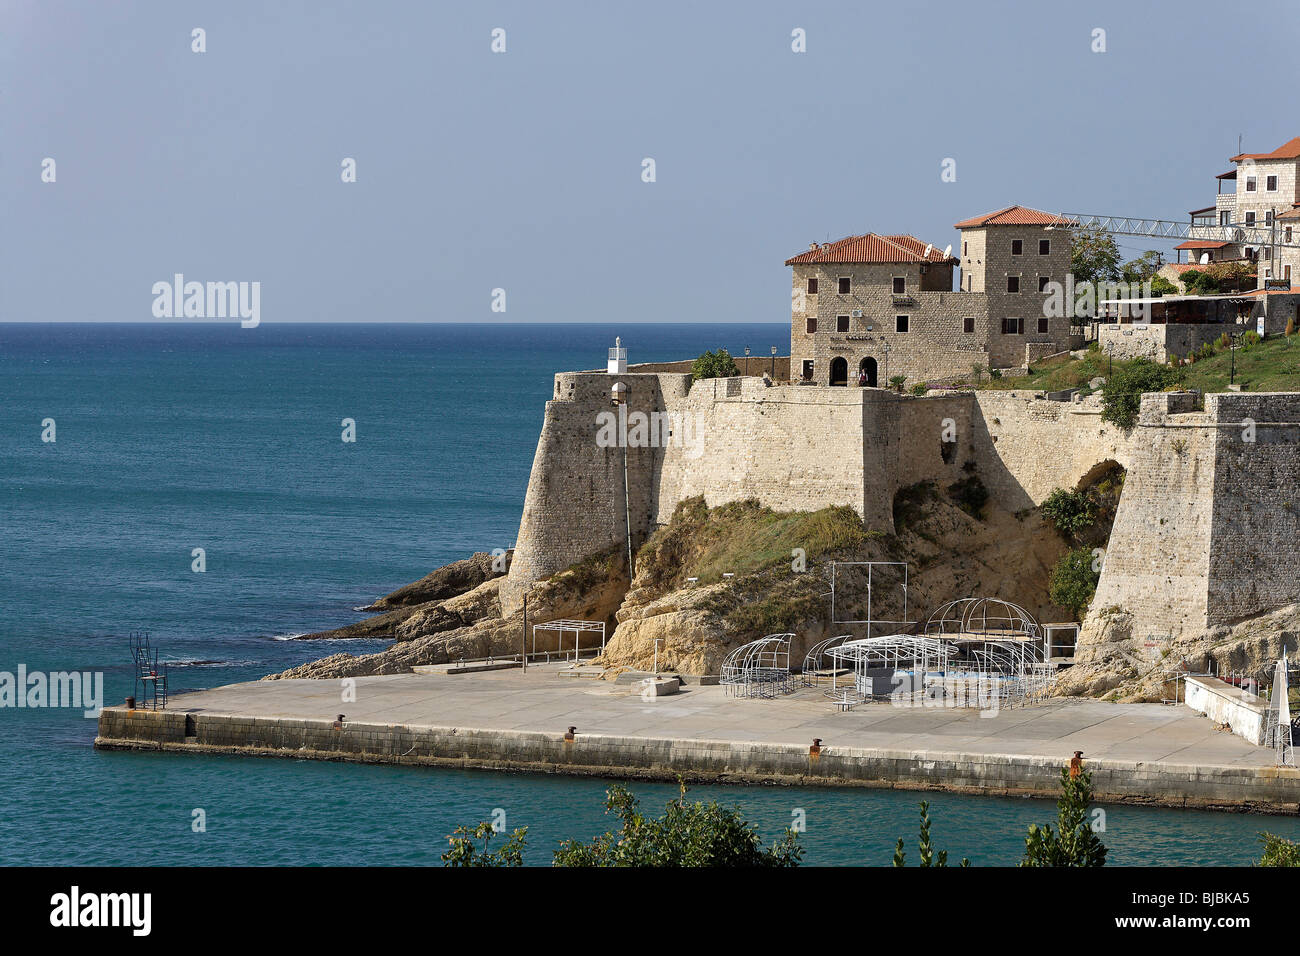 Ulcinj,fortification walls,old town,typical houses,Adriatic coast,Montenegro Stock Photo